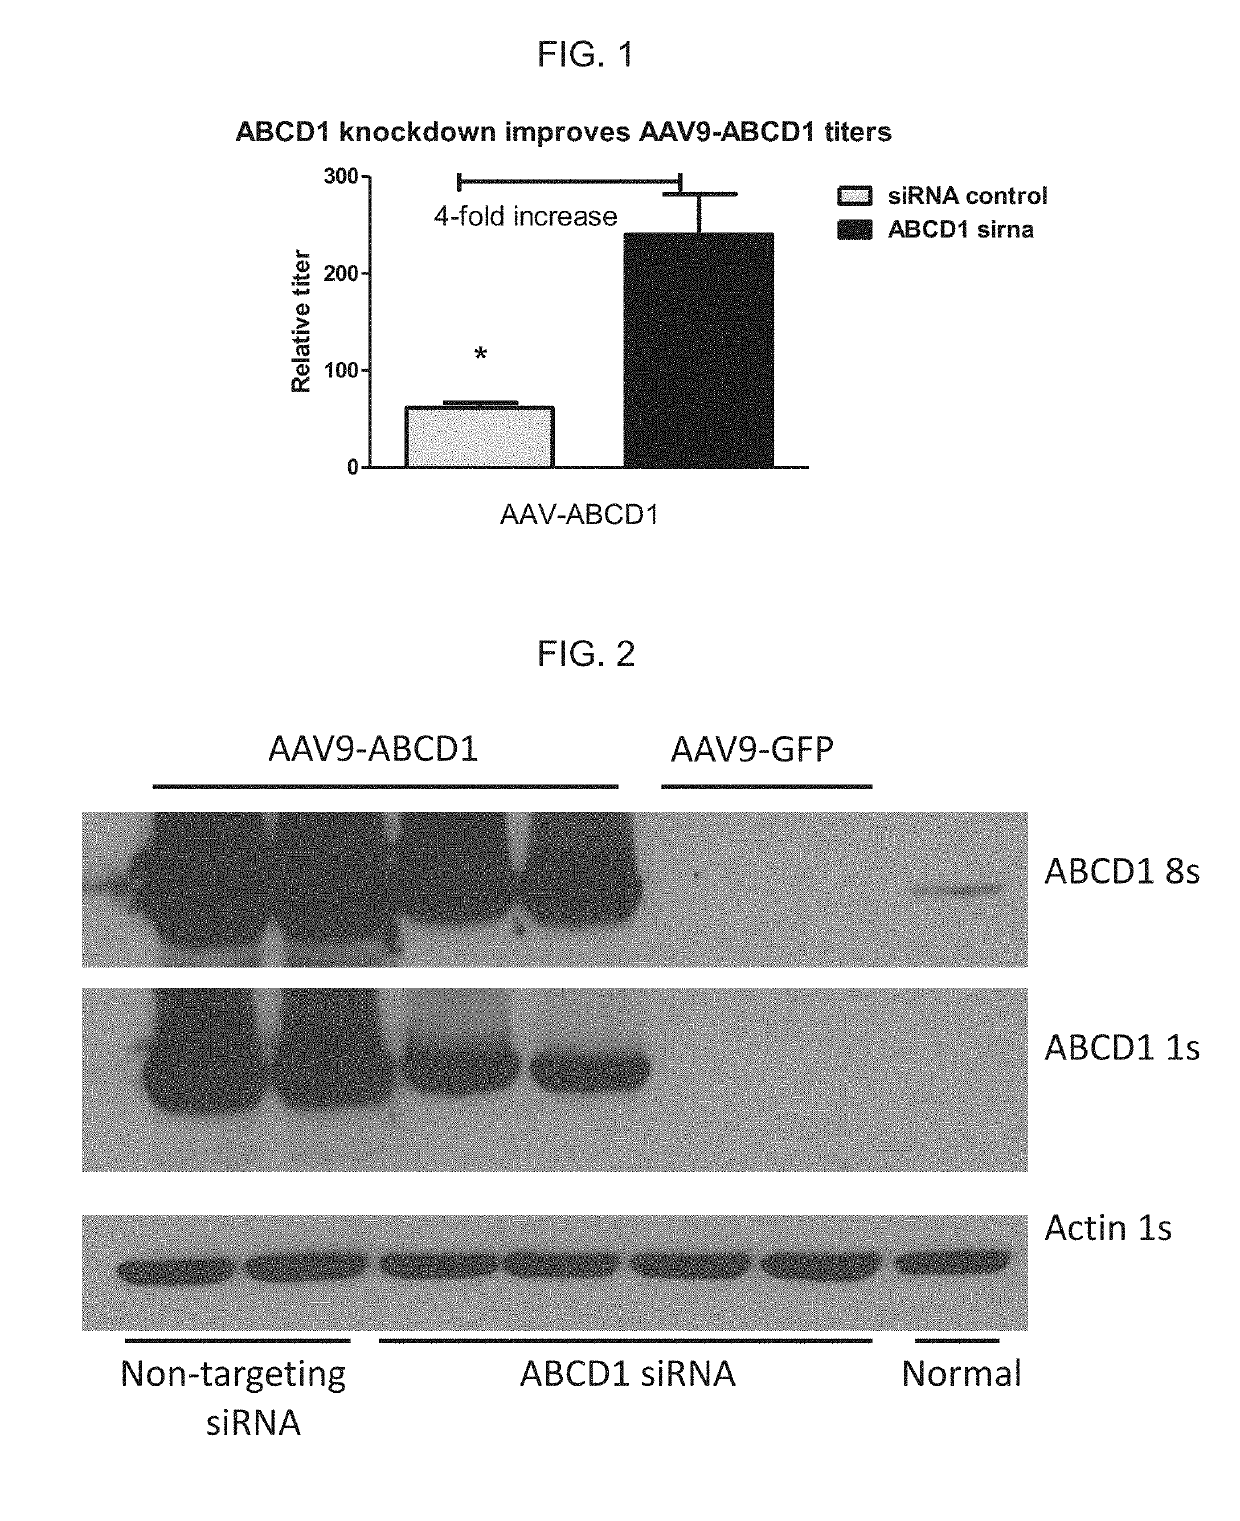 Intrathecal delivery of nucleic acid sequences encoding abcd1 for treatment of adrenomyeloneuropathy